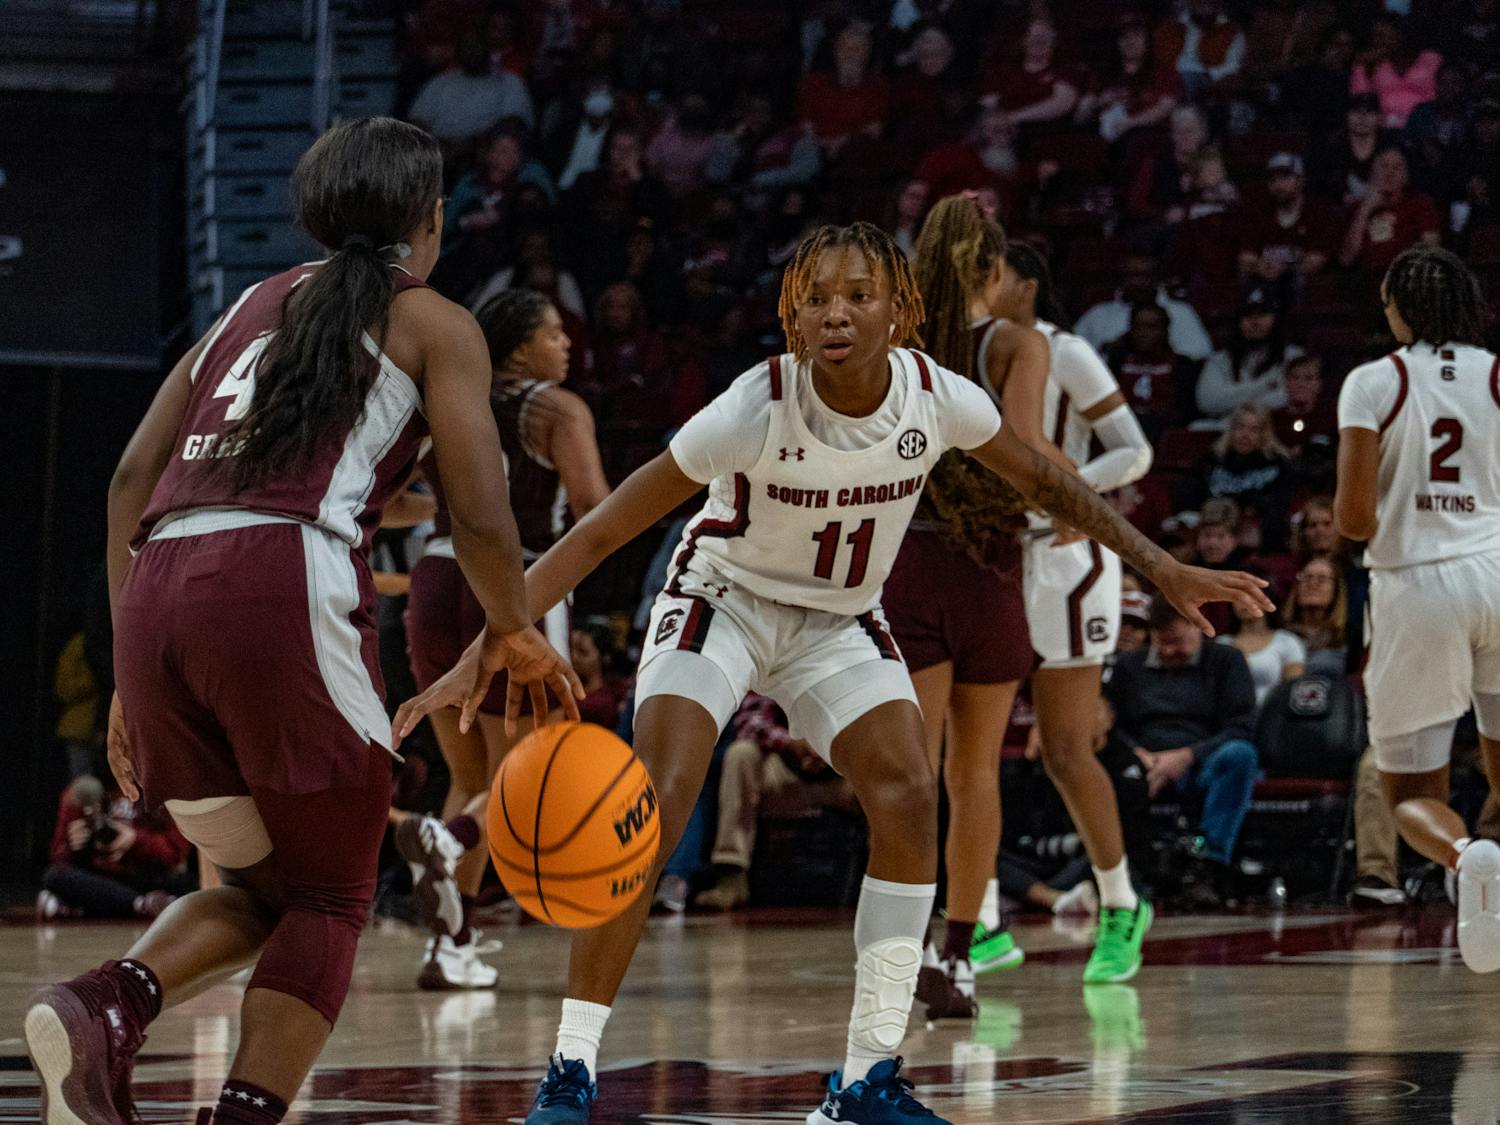 Freshman guard Talaysia Cooper guards against a Texas A&amp;M forward to halt her opponent’s drive to the basket on Dec. 29, 2022. South Carolina defeated Texas A&amp;M 76-34 in its SEC opener. &nbsp;